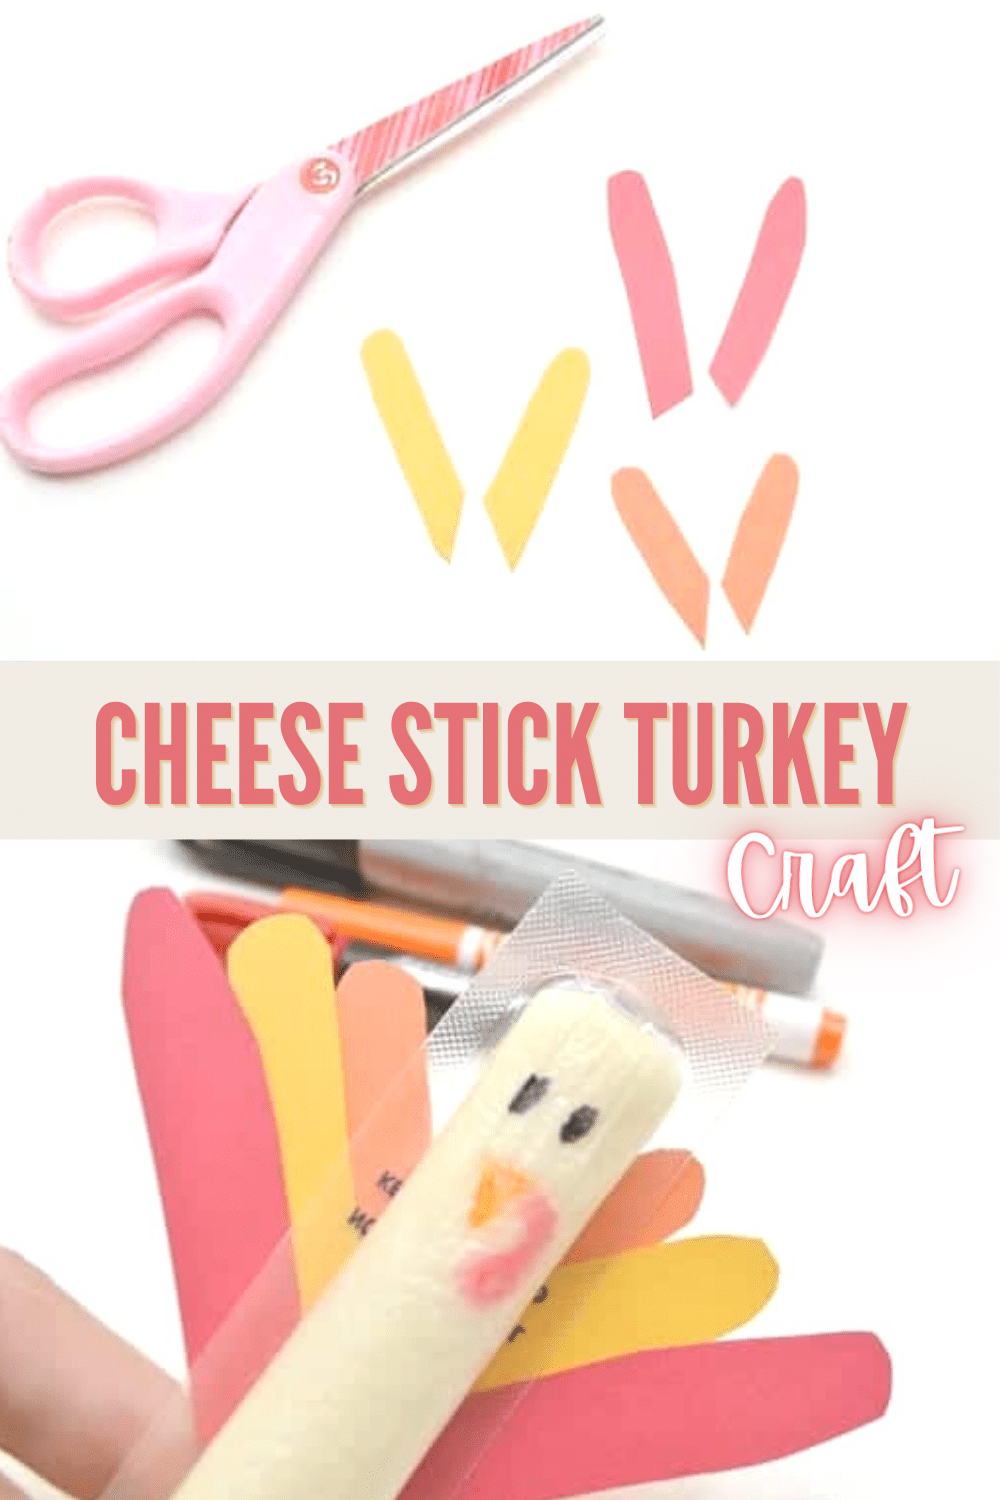 This cheese stick turkey is a fun and healthy snack or treat for kids to enjoy at Thanksgiving and it only takes a couple of minutes to make! #thanksgiving #healthysnack #snackcraft via @wondermomwannab